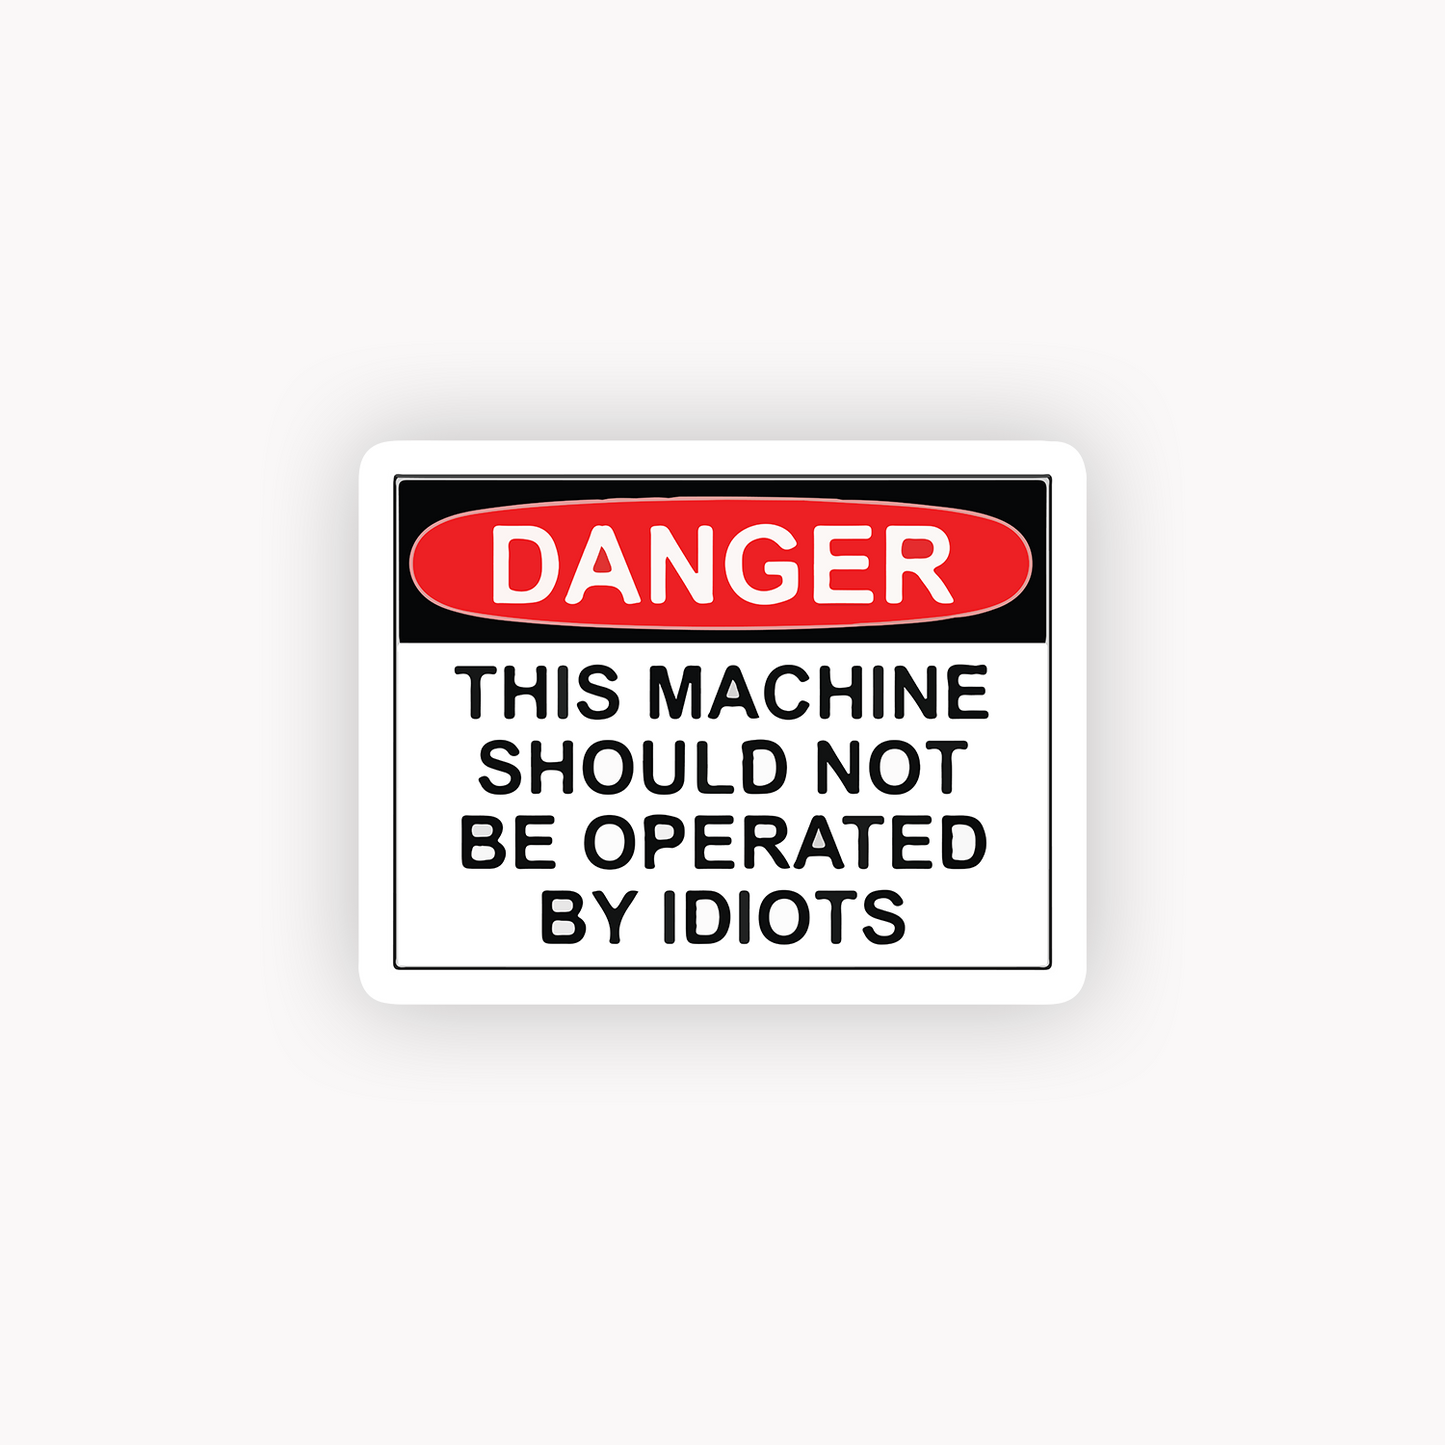 Danger this machine should not be operated by idiots